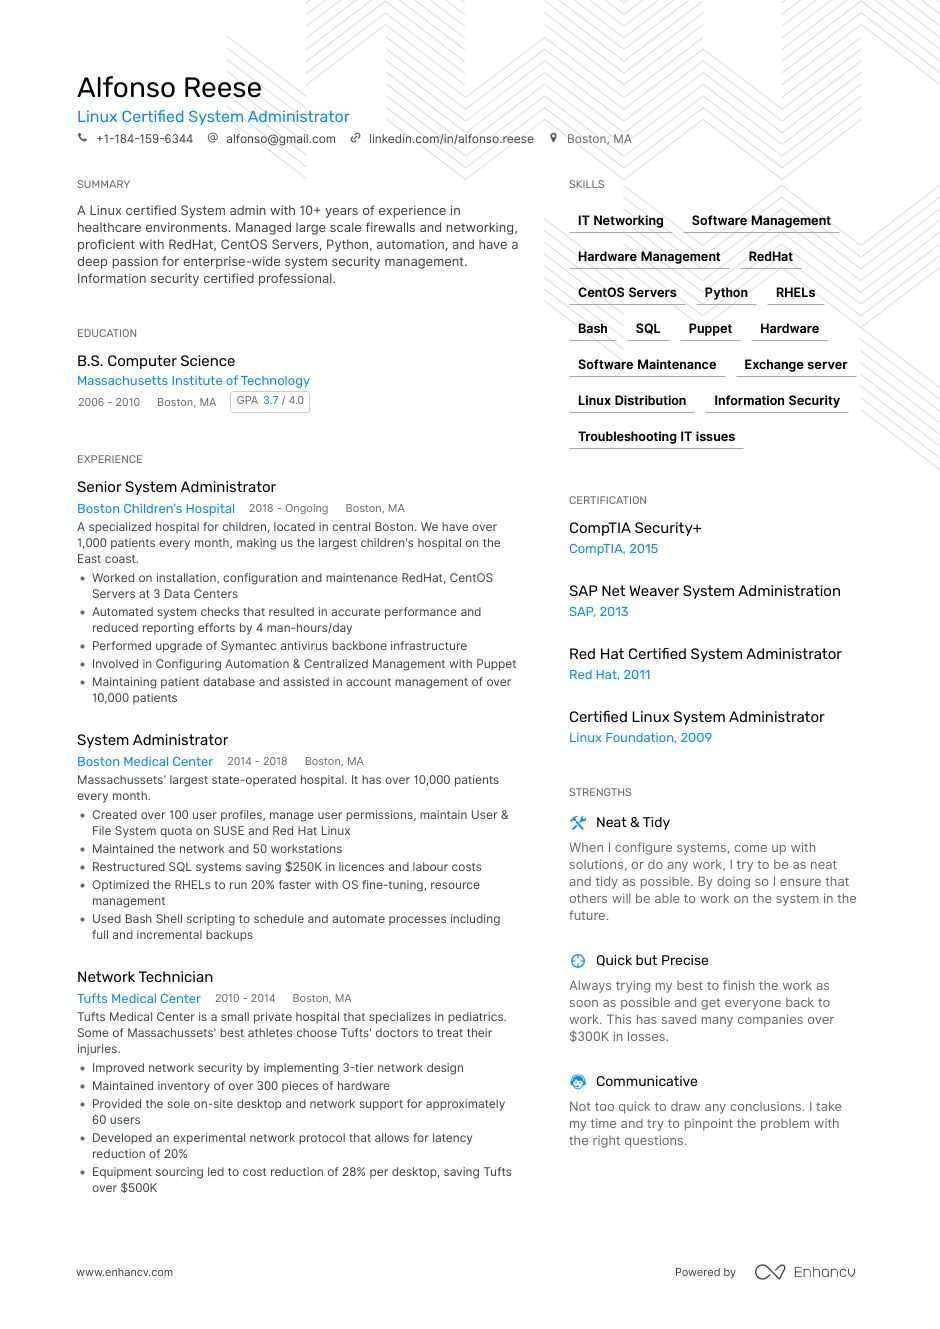 Sample Resume for Experienced Linux System Administrator System Administrator Resume: 4 Sys Admin Resume Examples & Guide …